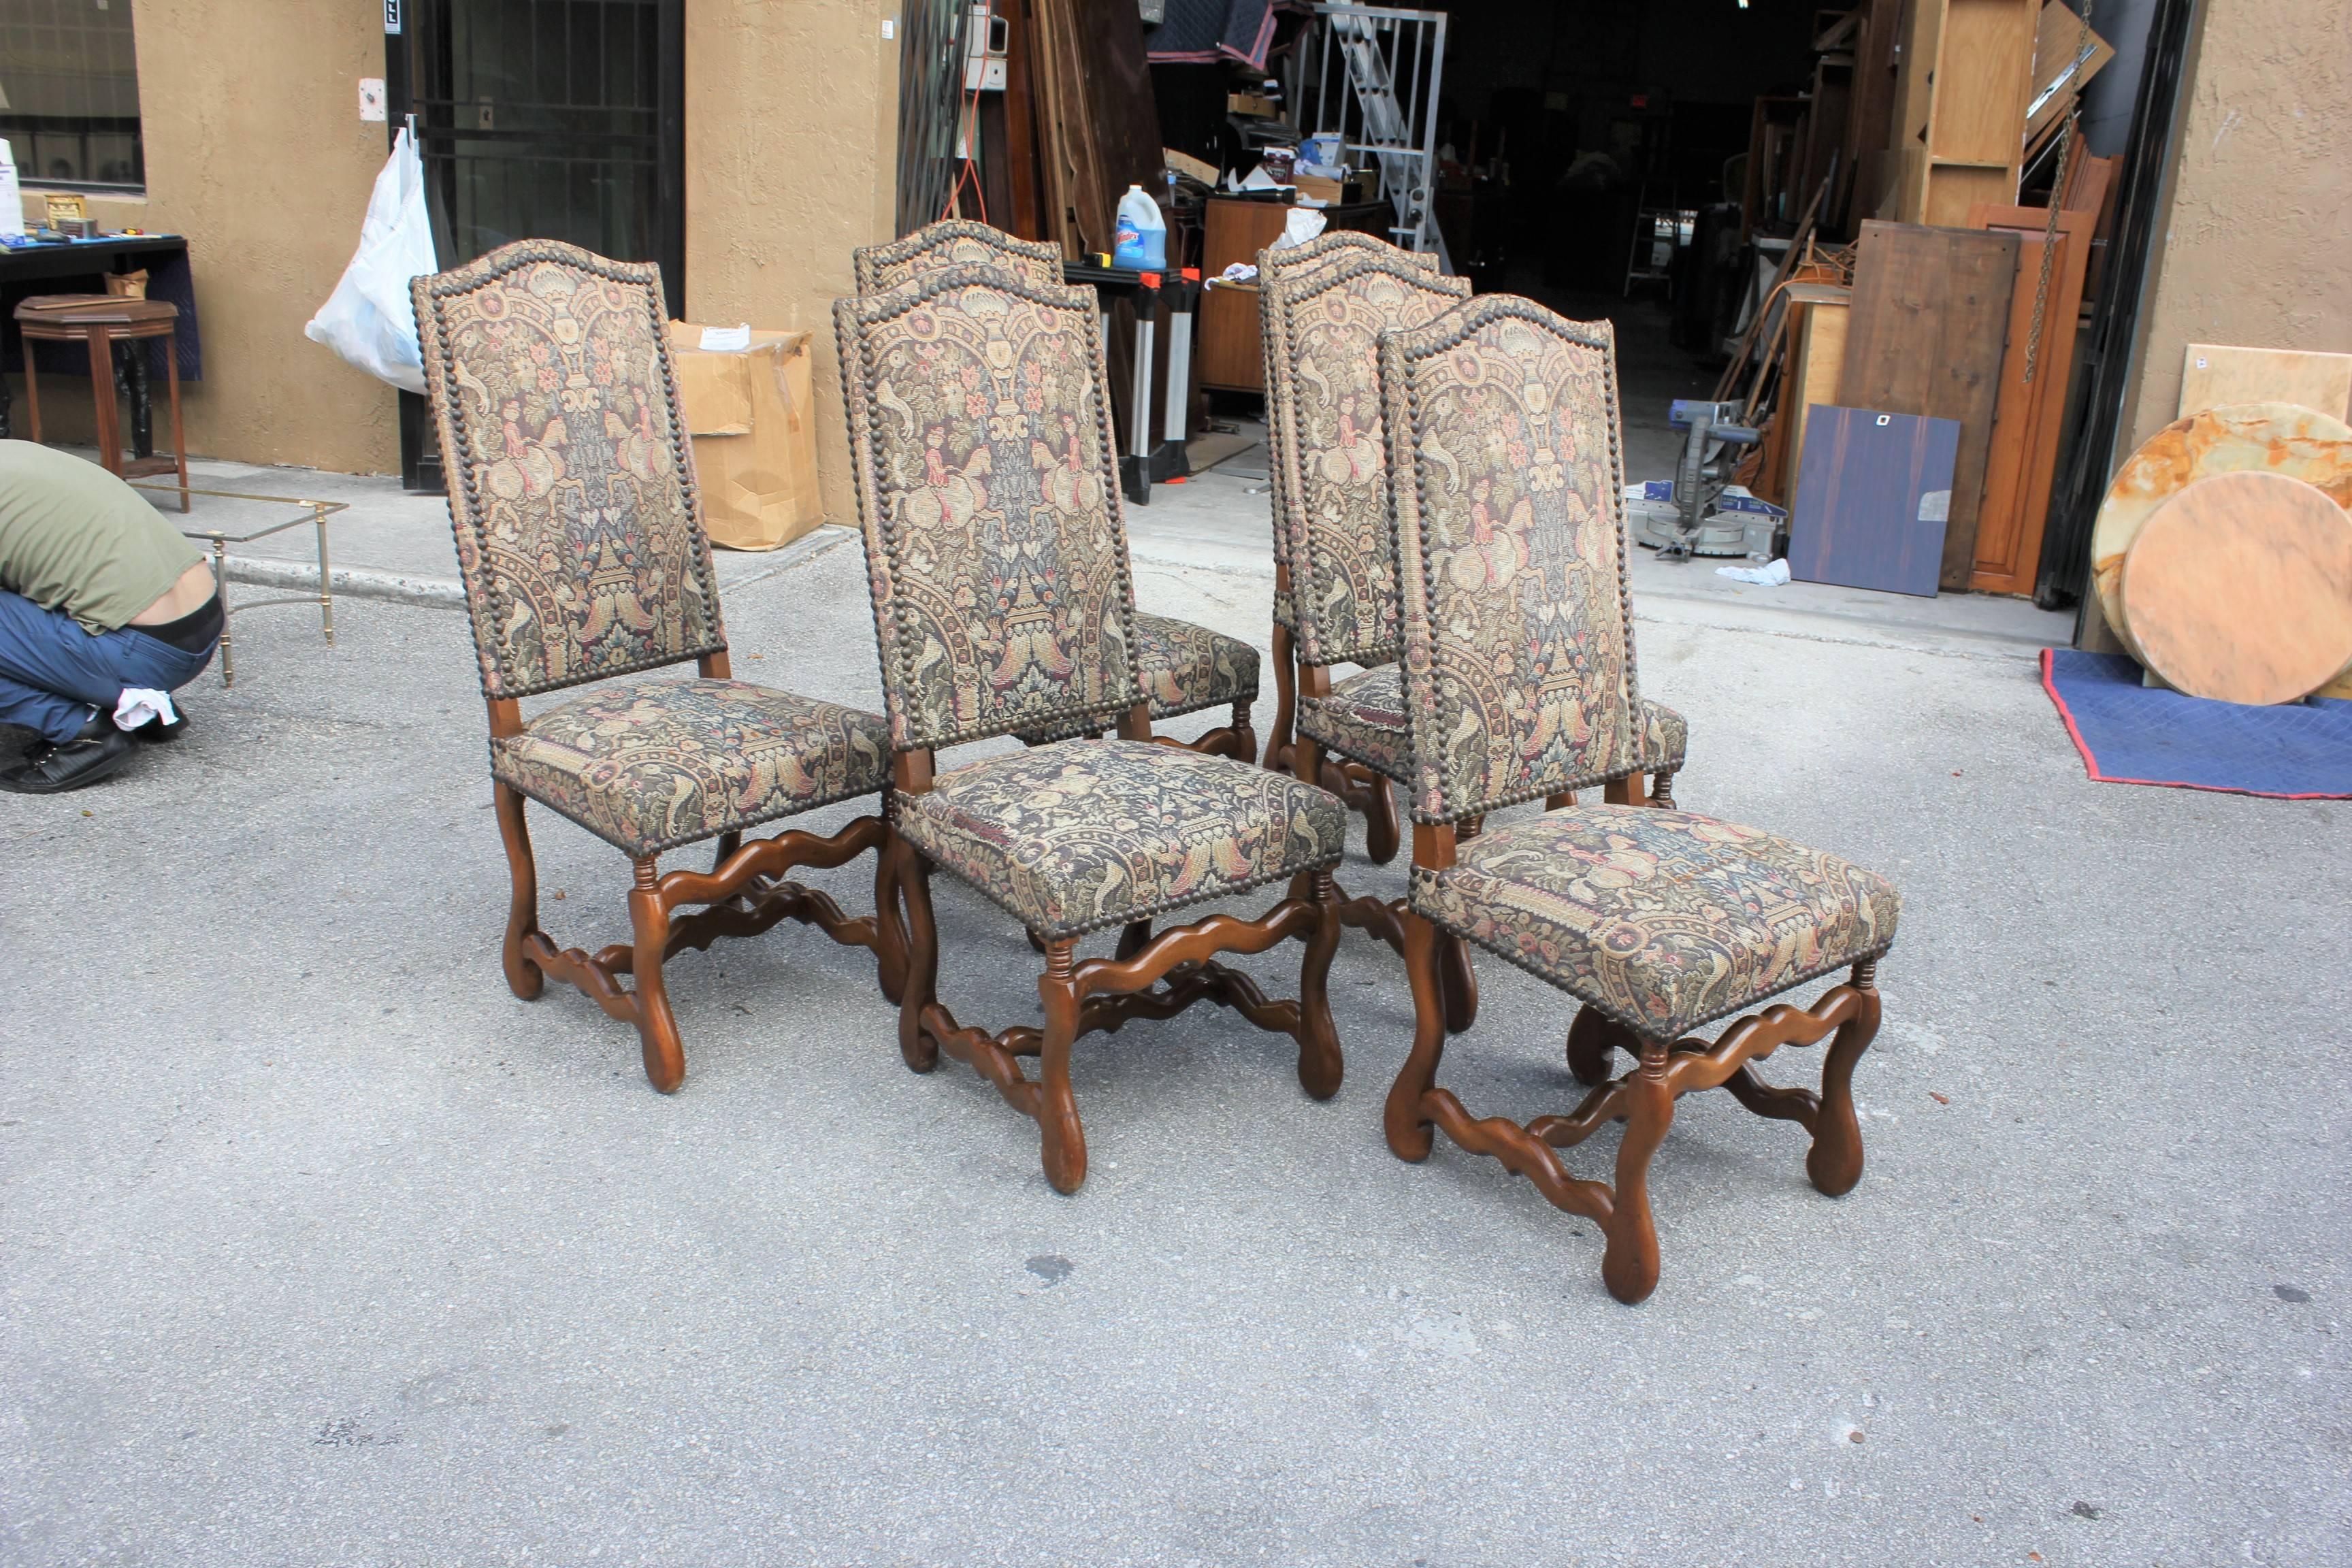 Fine set of six Louis XIII style Os de Mouton dining chairs with chapeau de gendarme backs, circa 1900th century. Vintage fabric upholstery with nailheads, solid walnut chair frames are in excellent condition. From South France Bordeaux. ( fabric